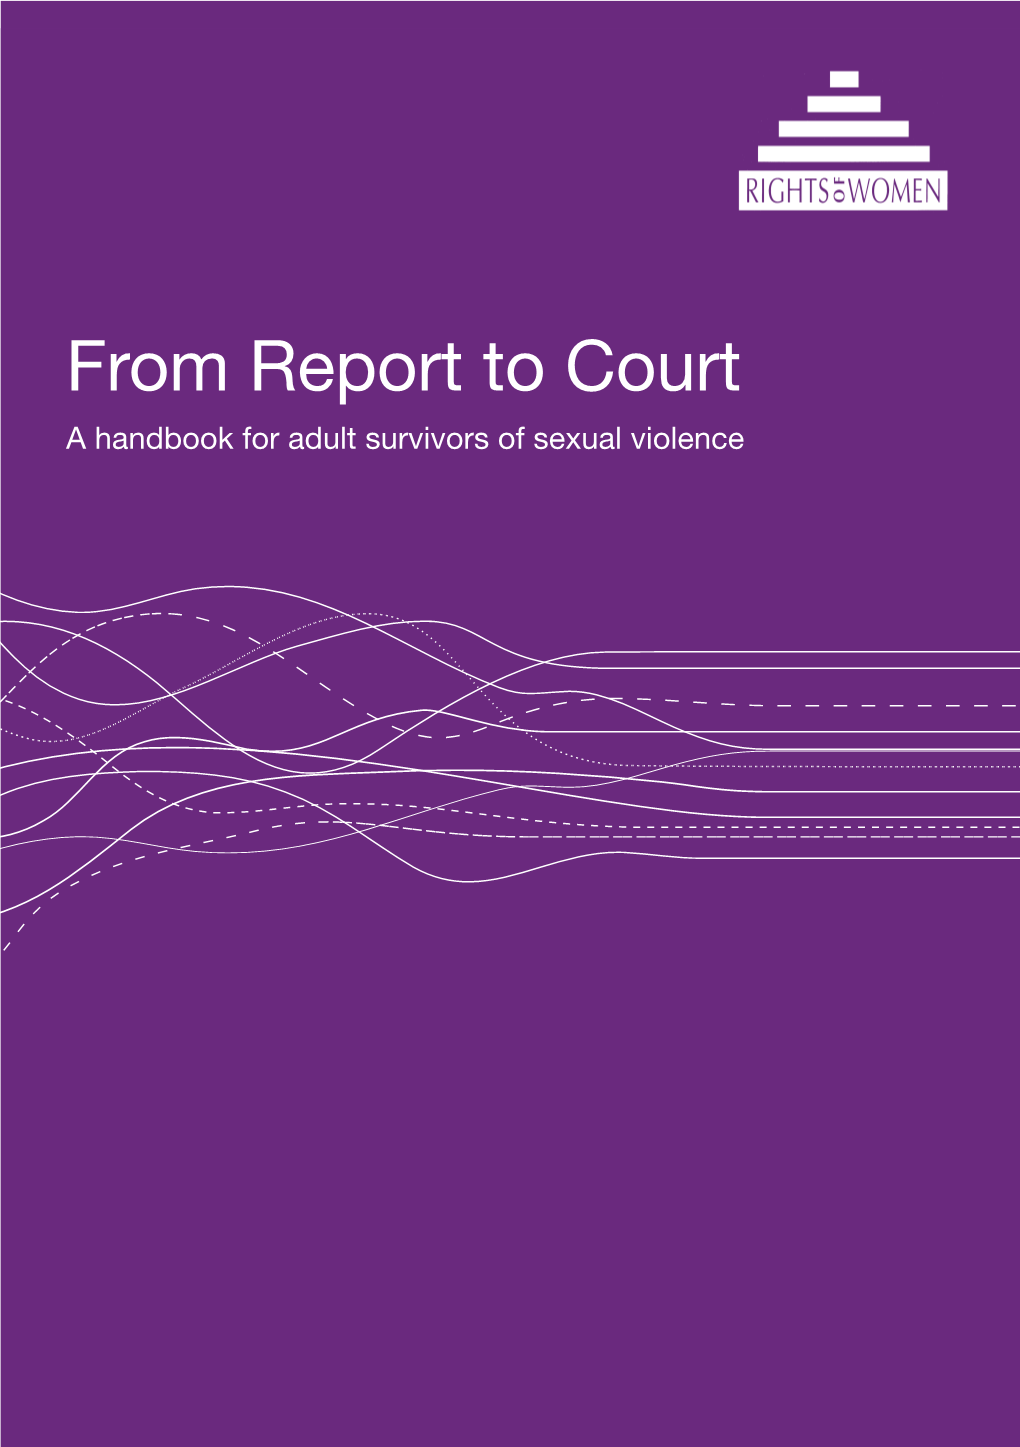 From Report to Court-A Handbook for Adult Survivors Of